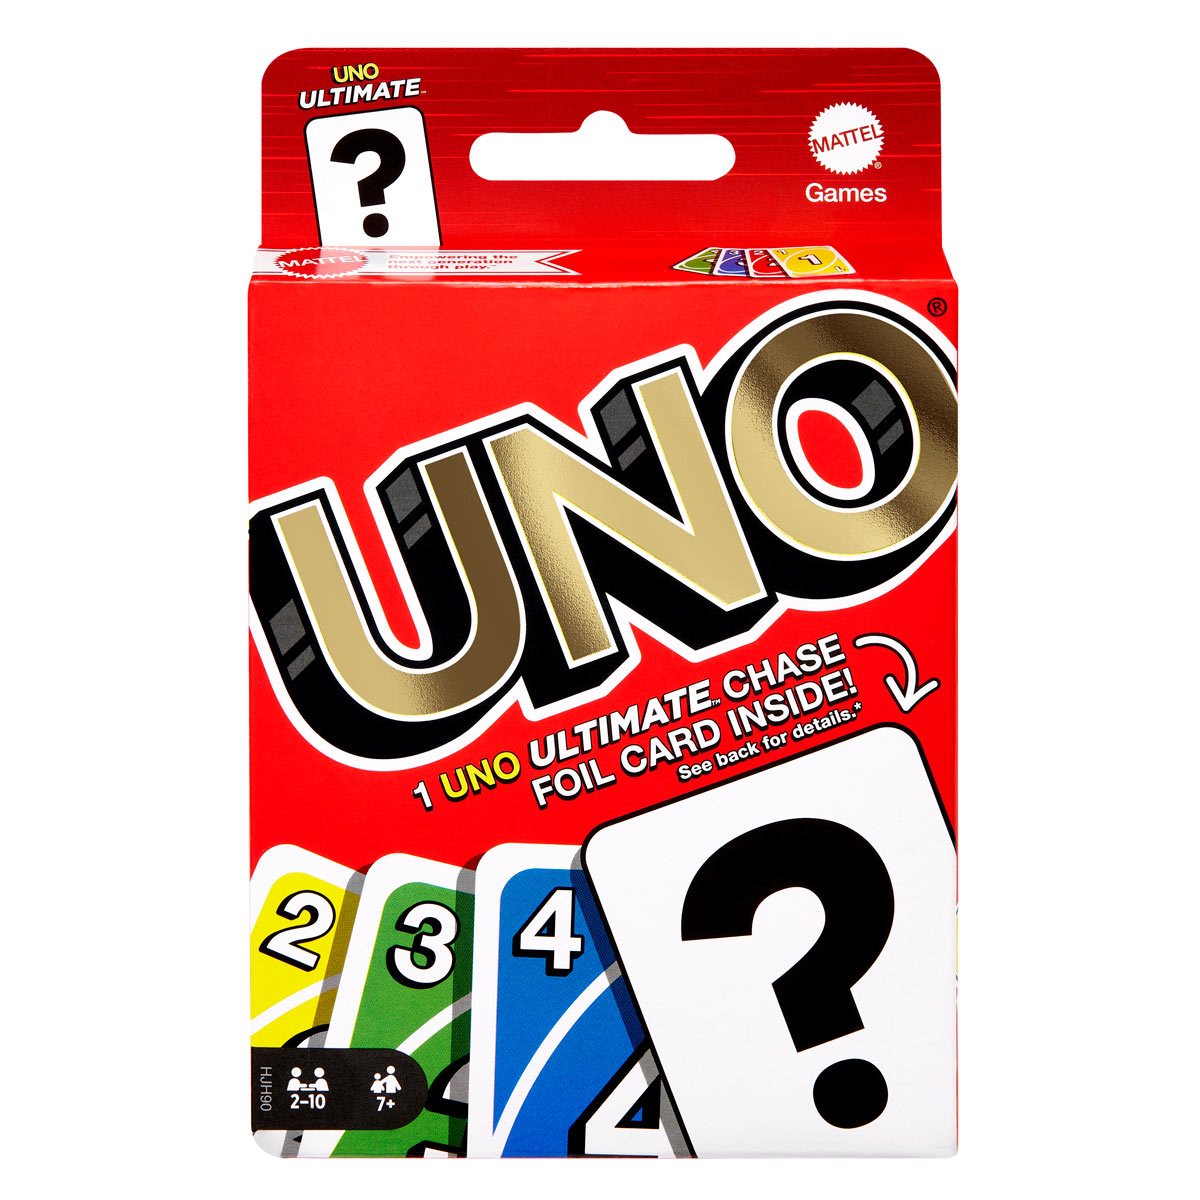 UNO Card Game with UNO Ultimate Foil Card